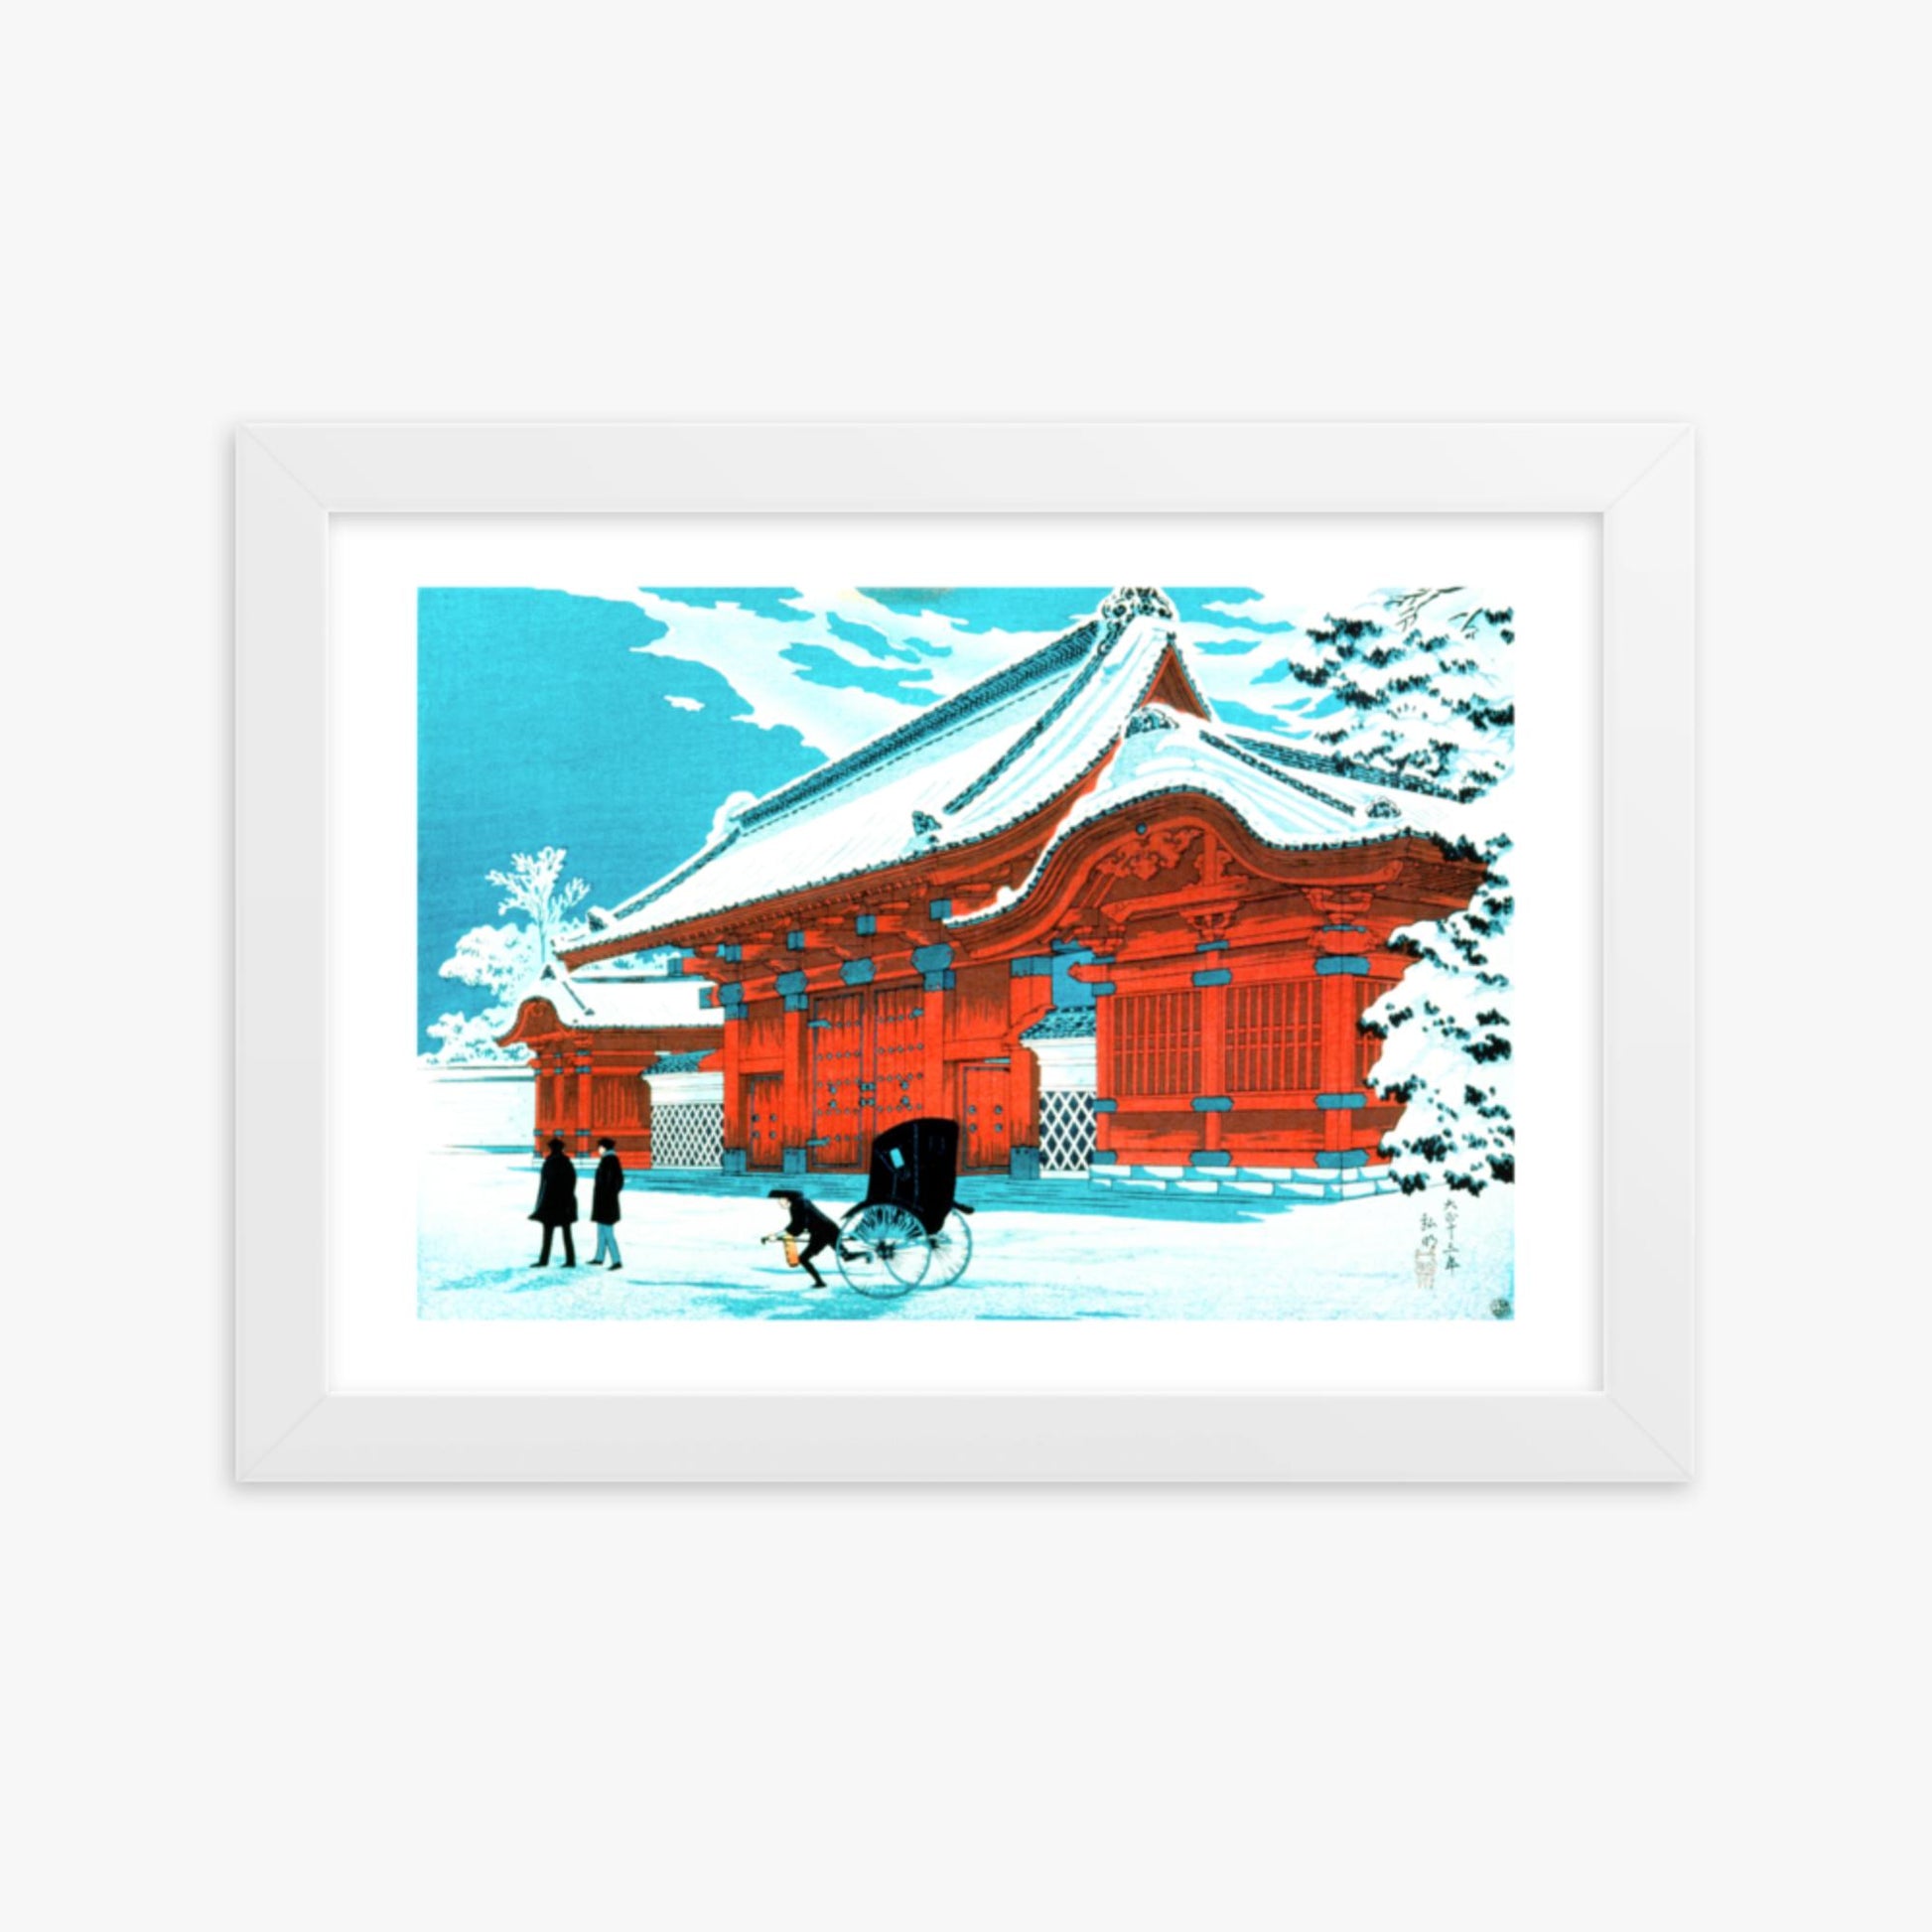 Takahashi Hiroaki (Shōtei) - The Red Gate of Hongo in Snow 21x30 cm Poster With White Frame